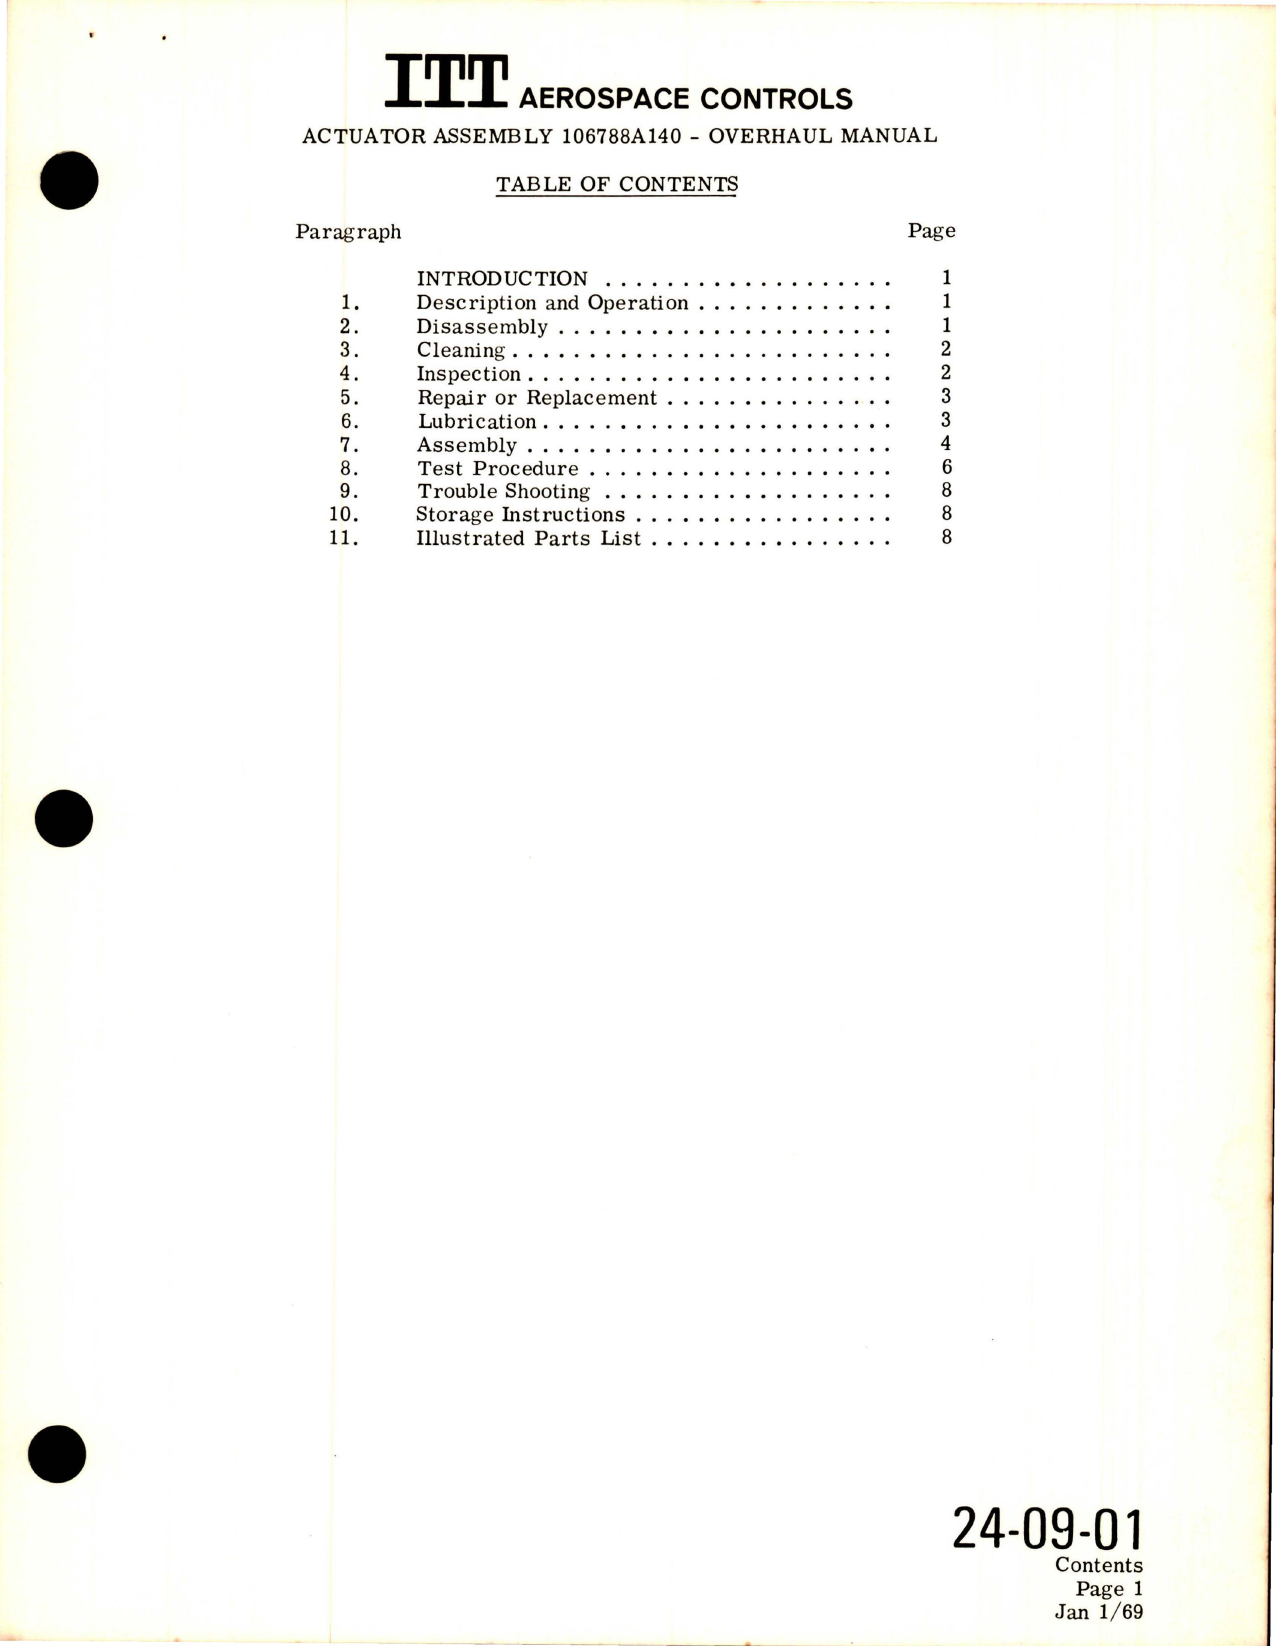 Sample page 5 from AirCorps Library document: Overhaul Instructions with Illustrated Parts List for Manual Override Actuator - Part 106788A140